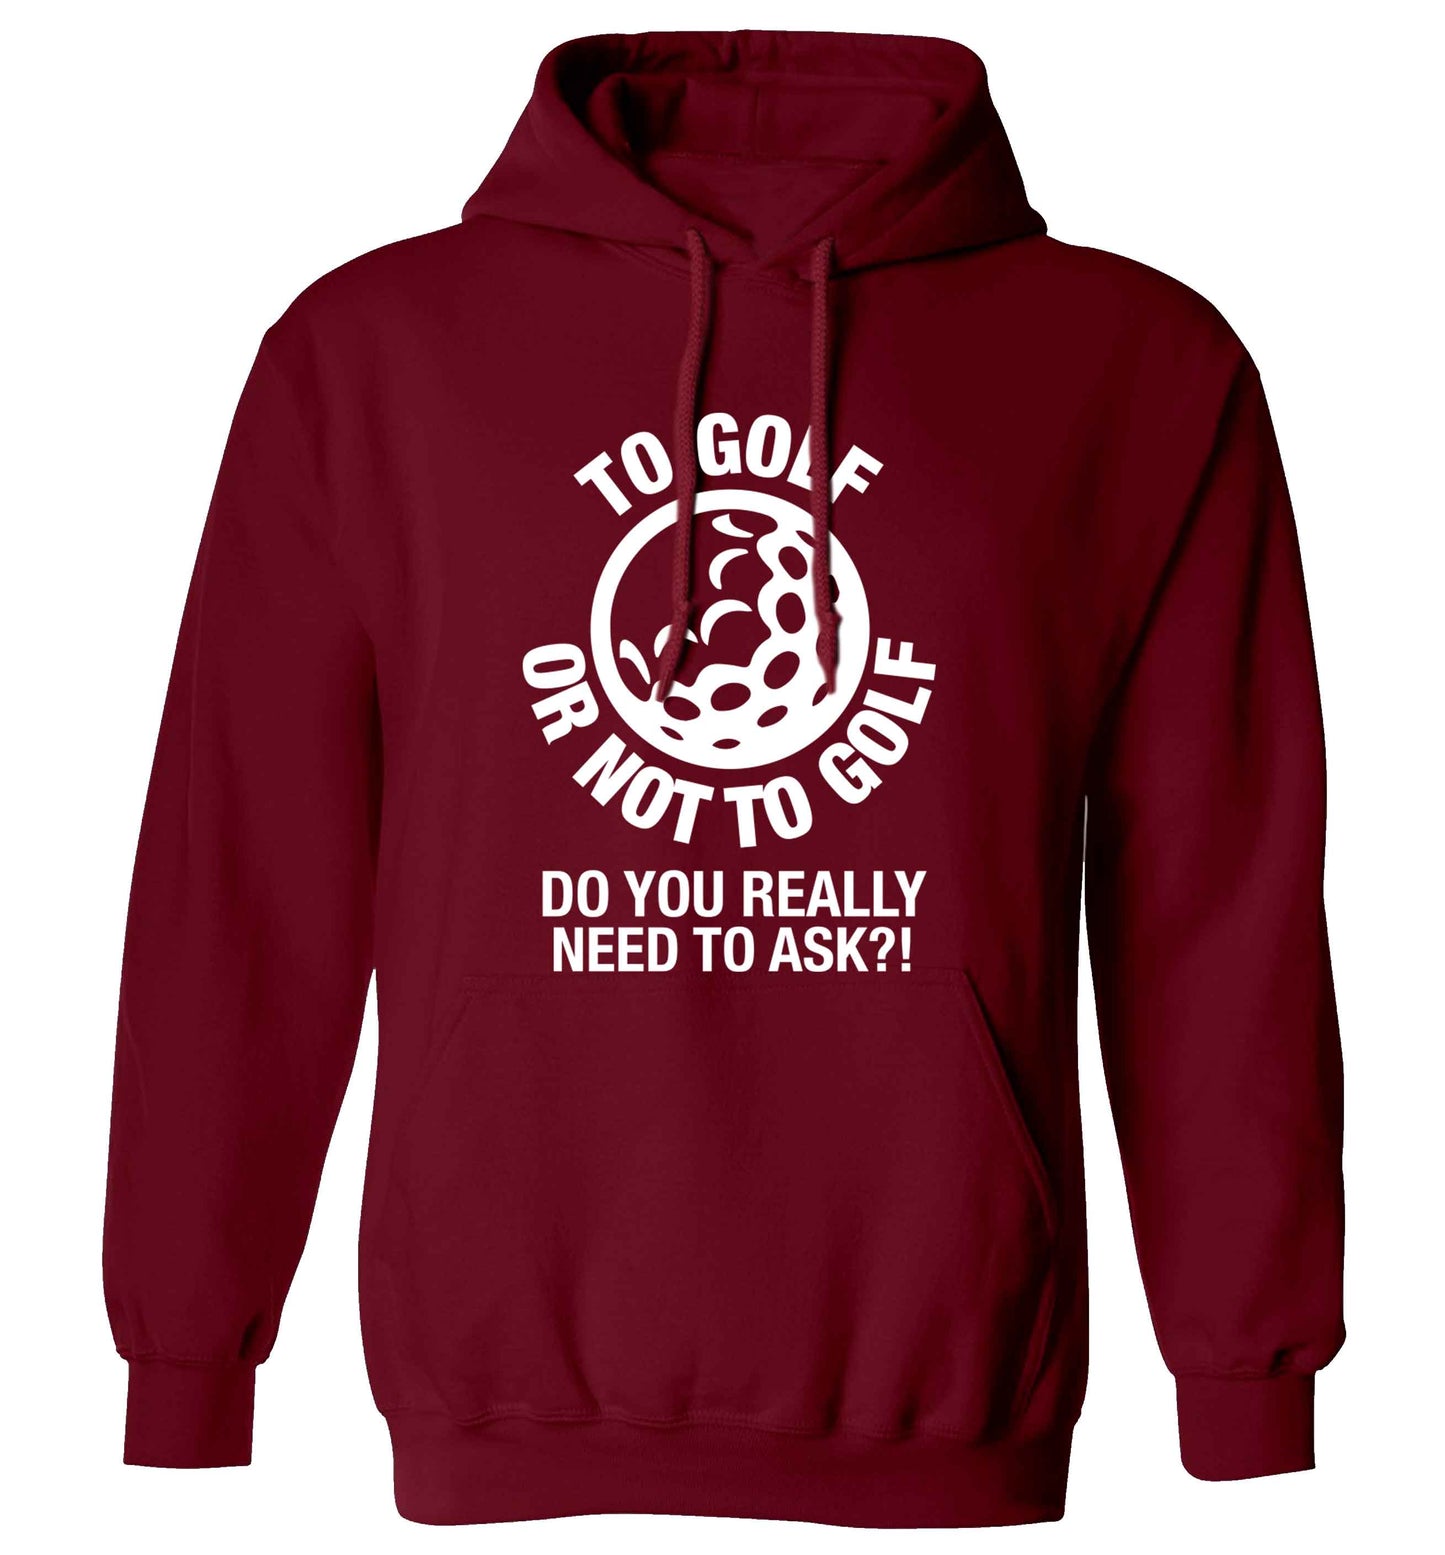 To golf or not to golf Do you really need to ask?! adults unisex maroon hoodie 2XL